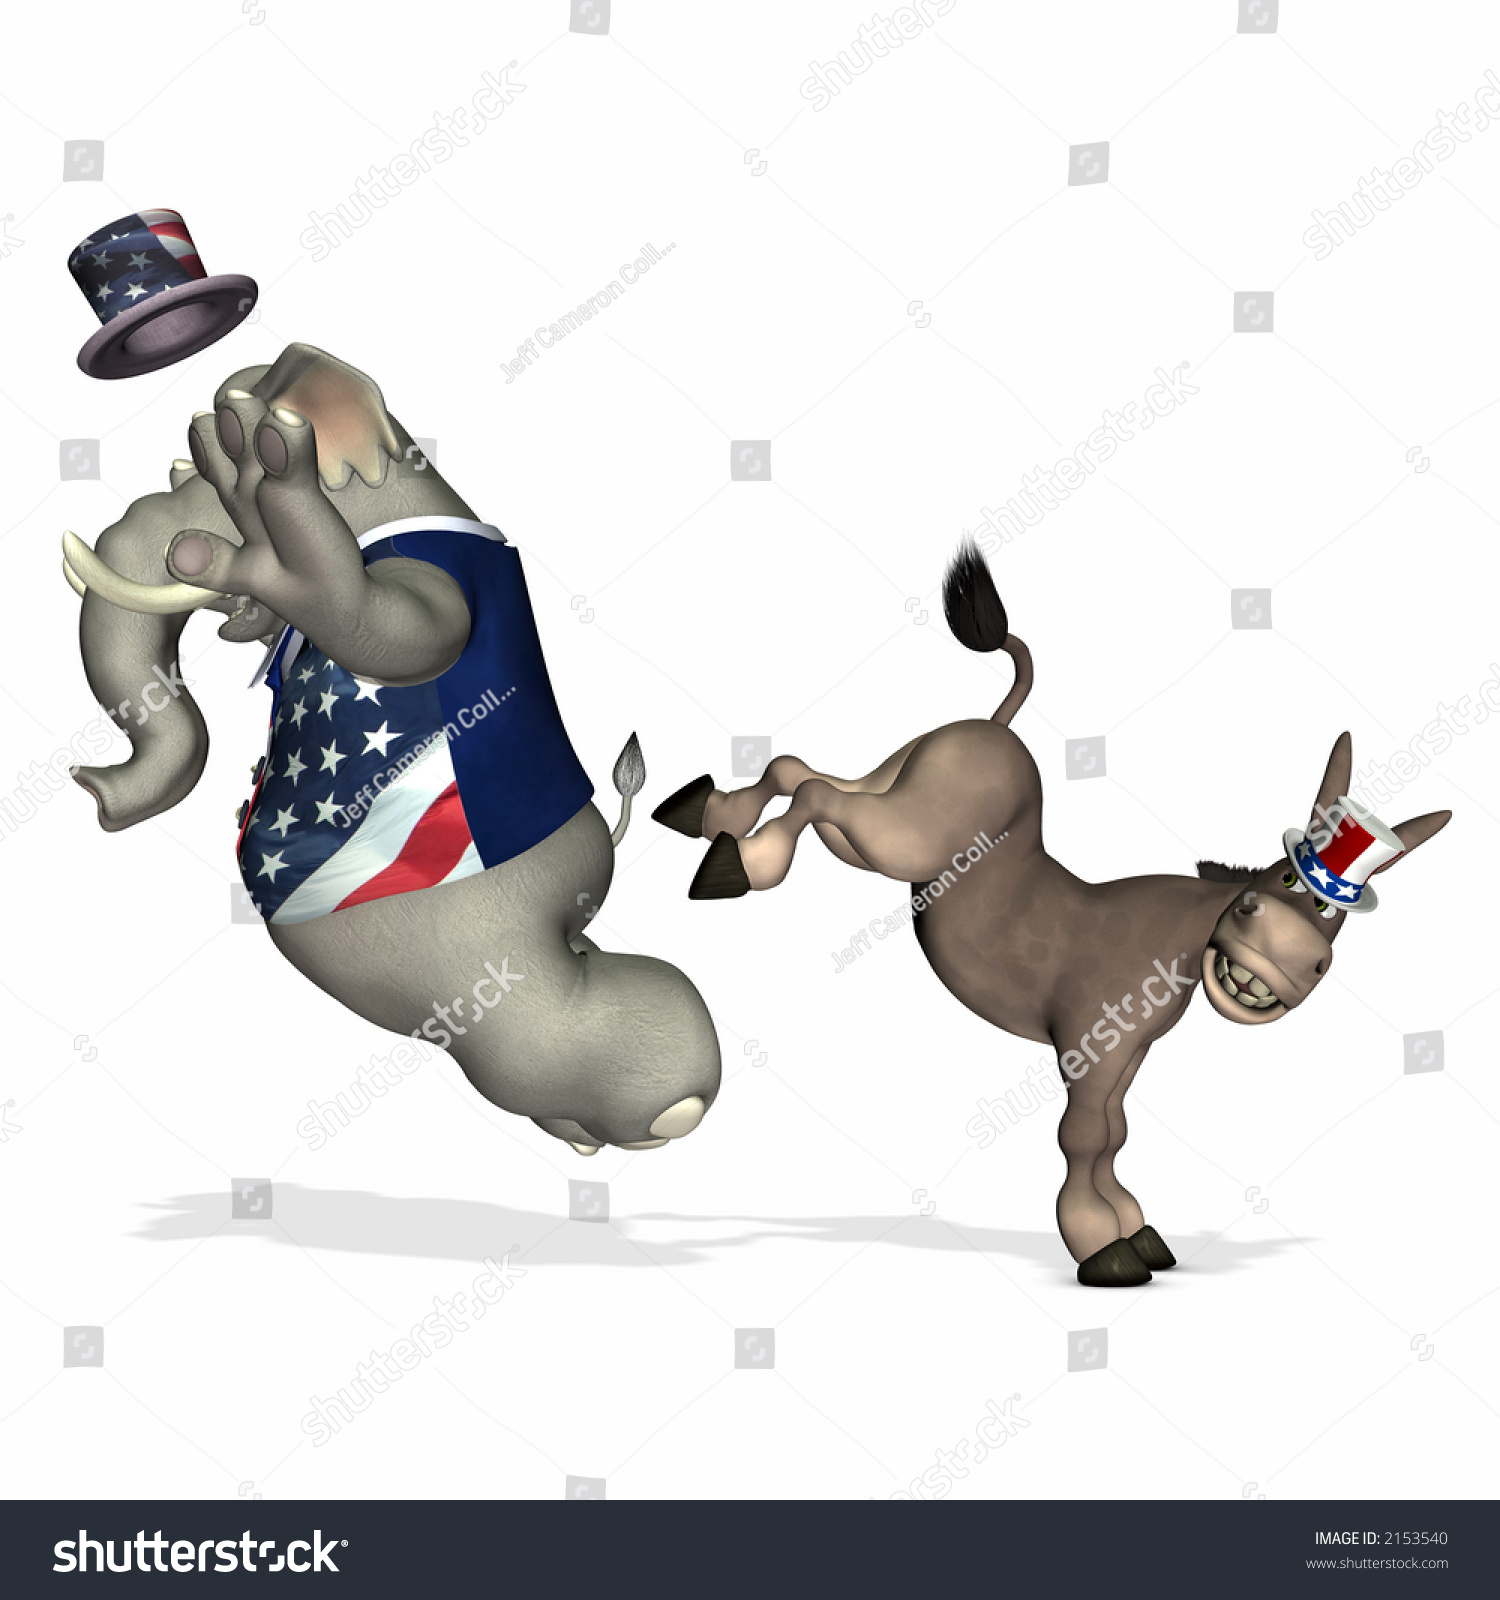 https://image.shutterstock.com/z/stock-photo-democrat-represented-by-a-donkey-kicking-the-republican-represented-by-an-elephant-political-humor-2153540.jpg